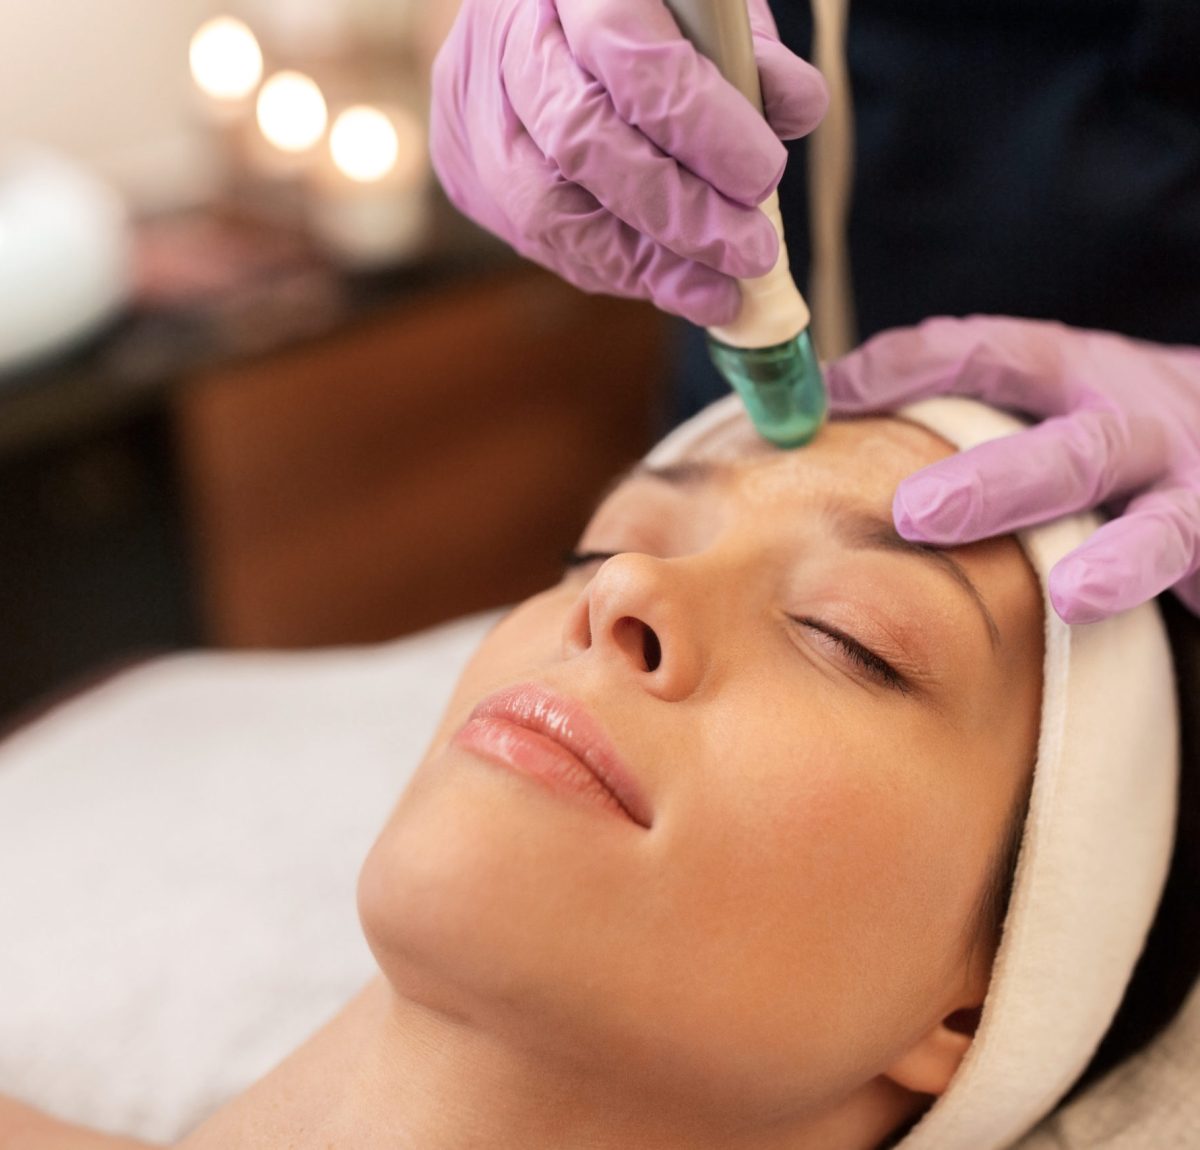 people, beauty, cosmetology, exfoliation and technology concept - beautiful young woman having microdermabrasion facial treatment with crystals in spa